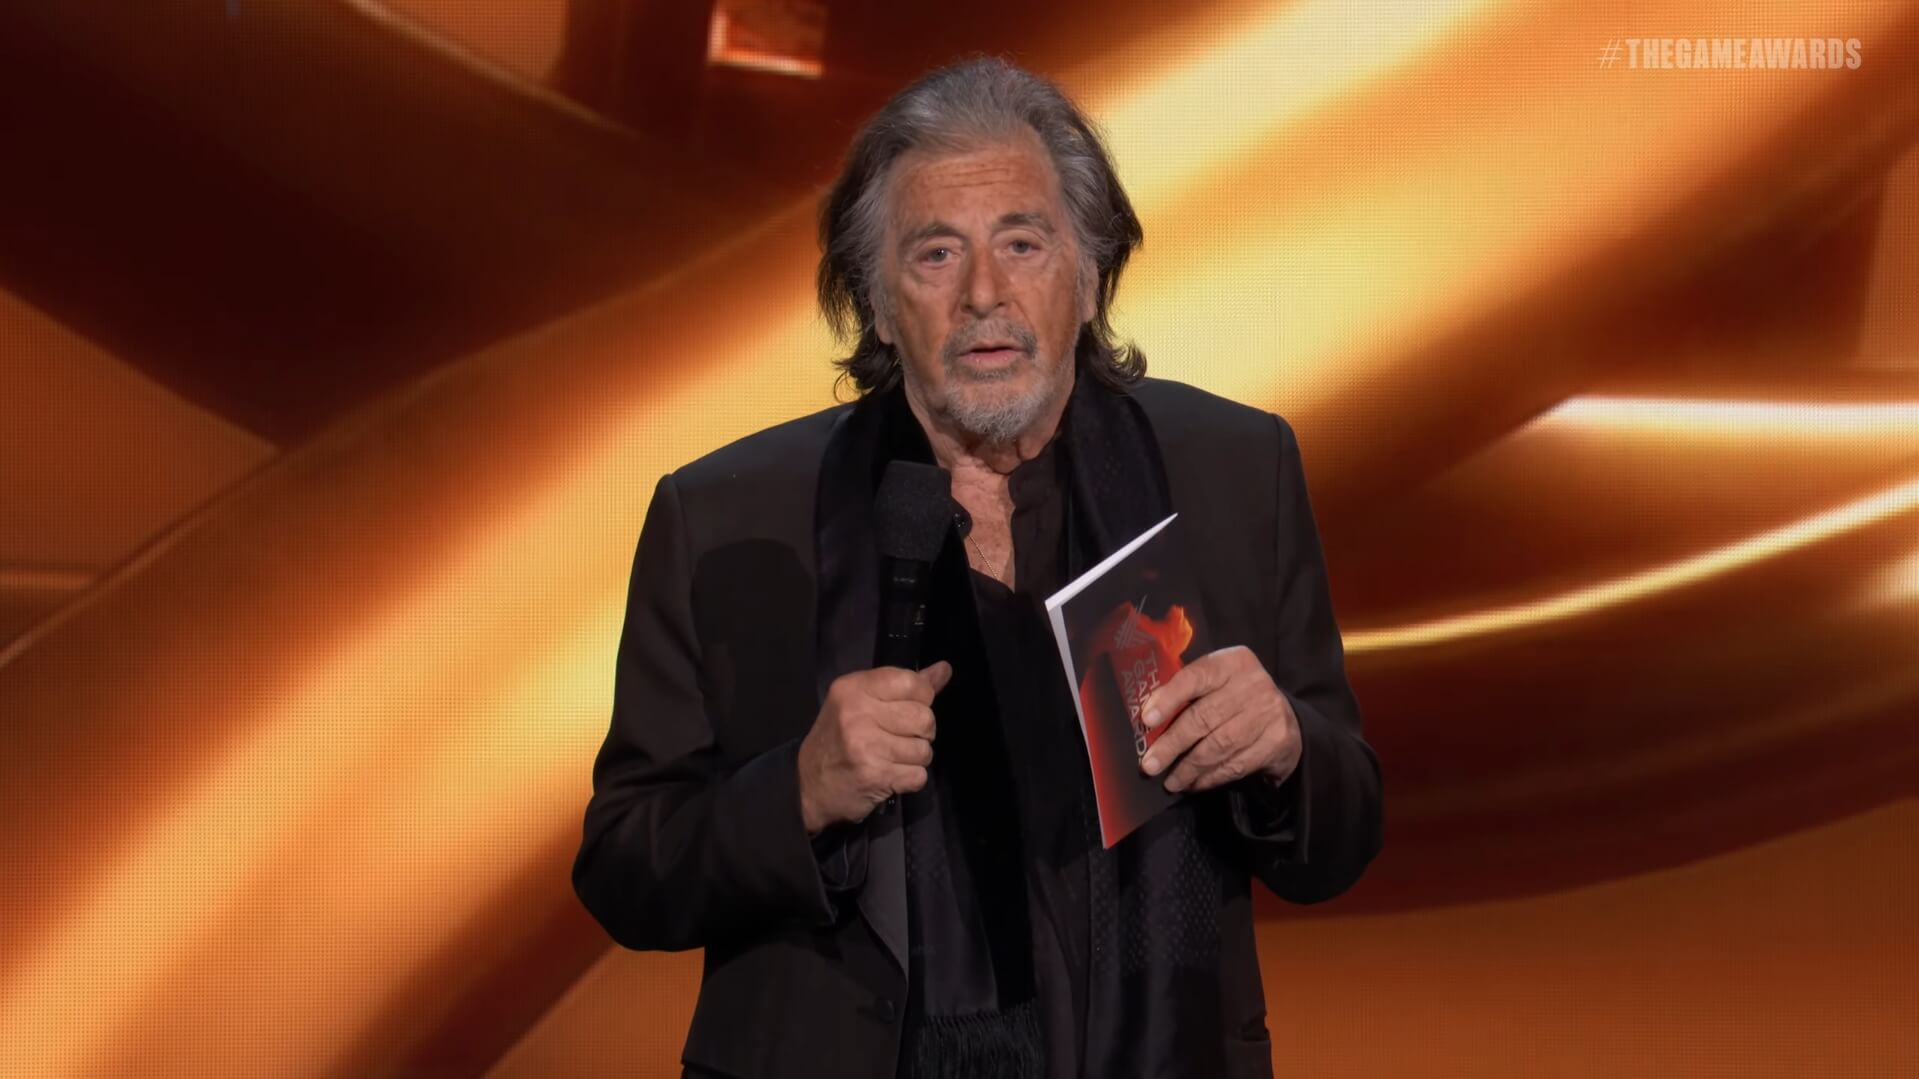 Al Pacino Has "Not Been Paid Anything" To Present At The Game Awards 2022, Says Geoff Keighley